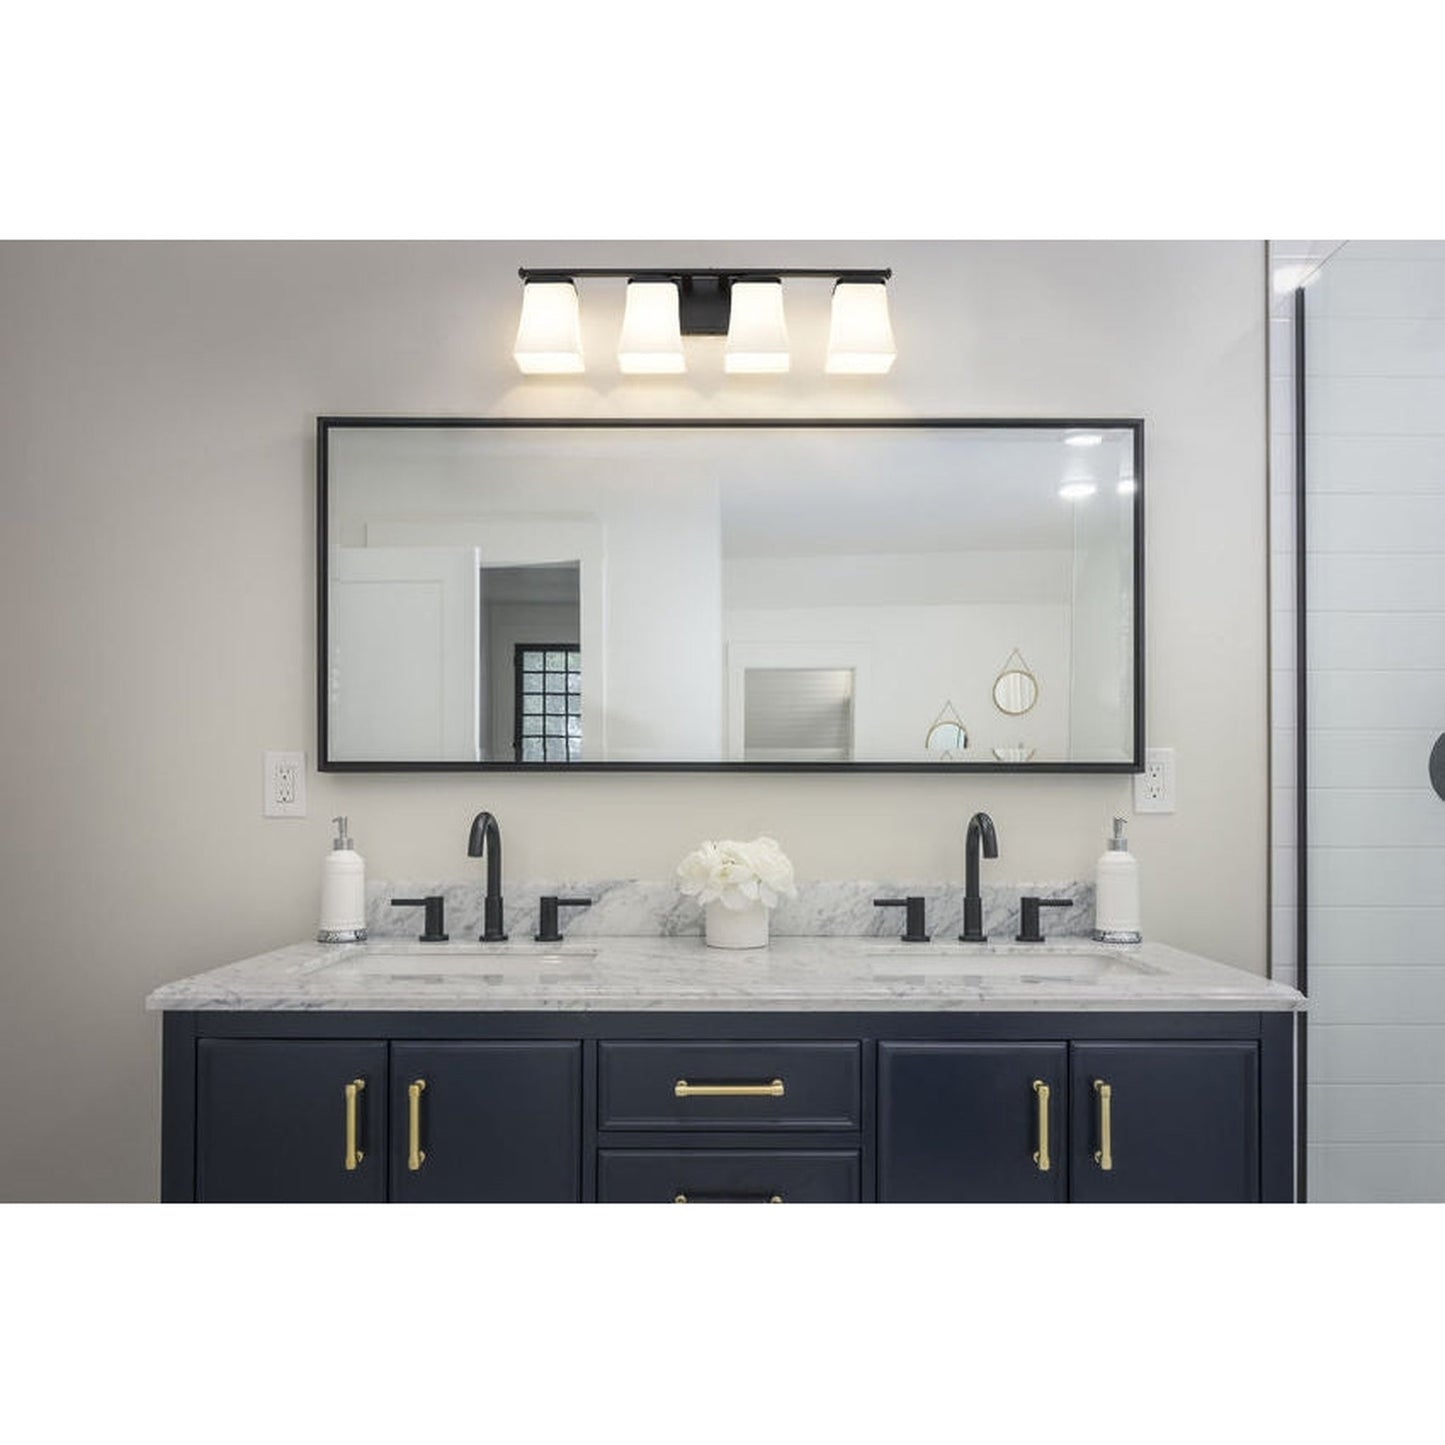 Z-Lite Darcy 28" 4-Light Matte Black Vanity Light With Etched Opal Glass Shade